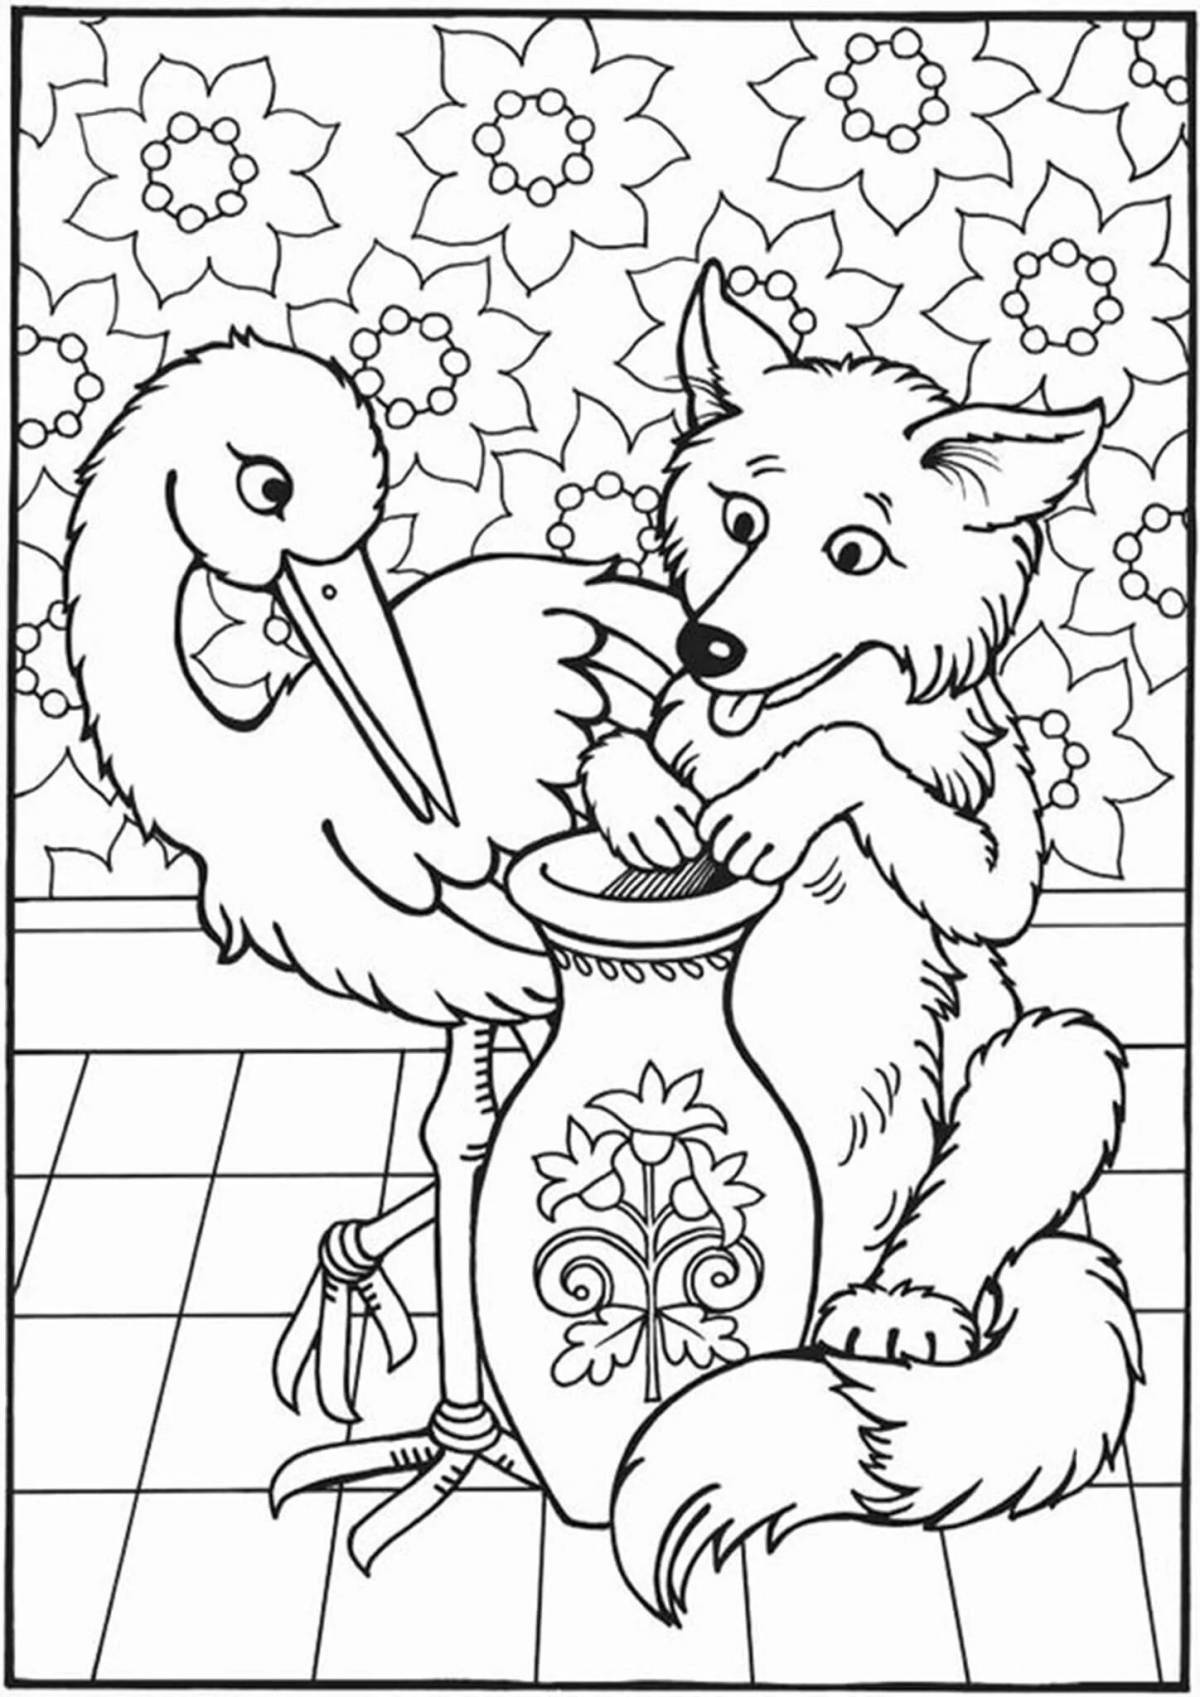 Fox and crane for kids #1